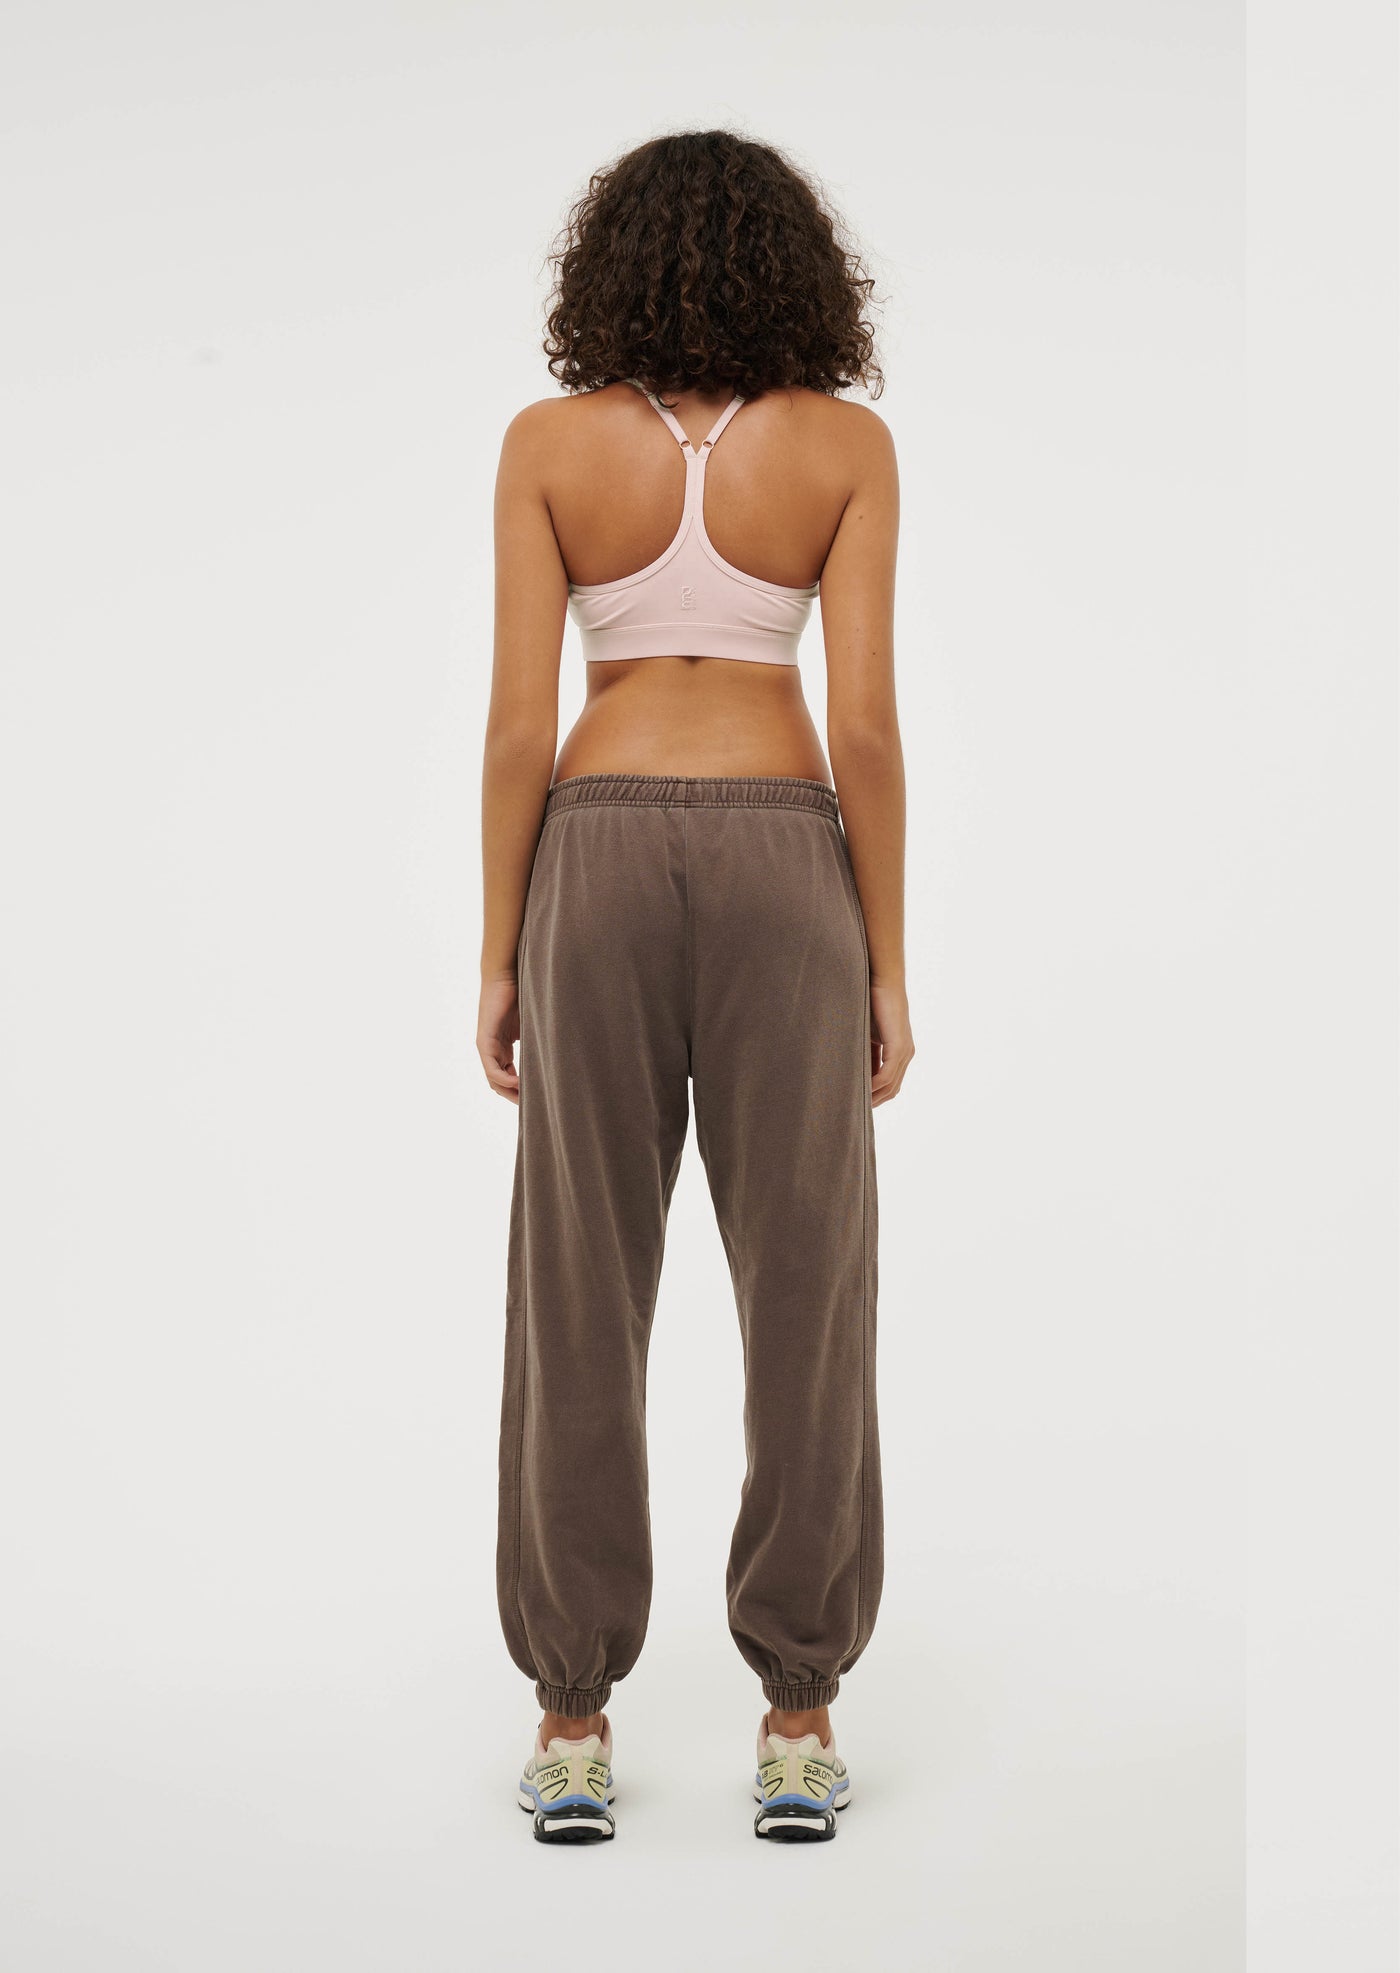 PHOENIX TRACKPANT IN WASHED CHESTNUT